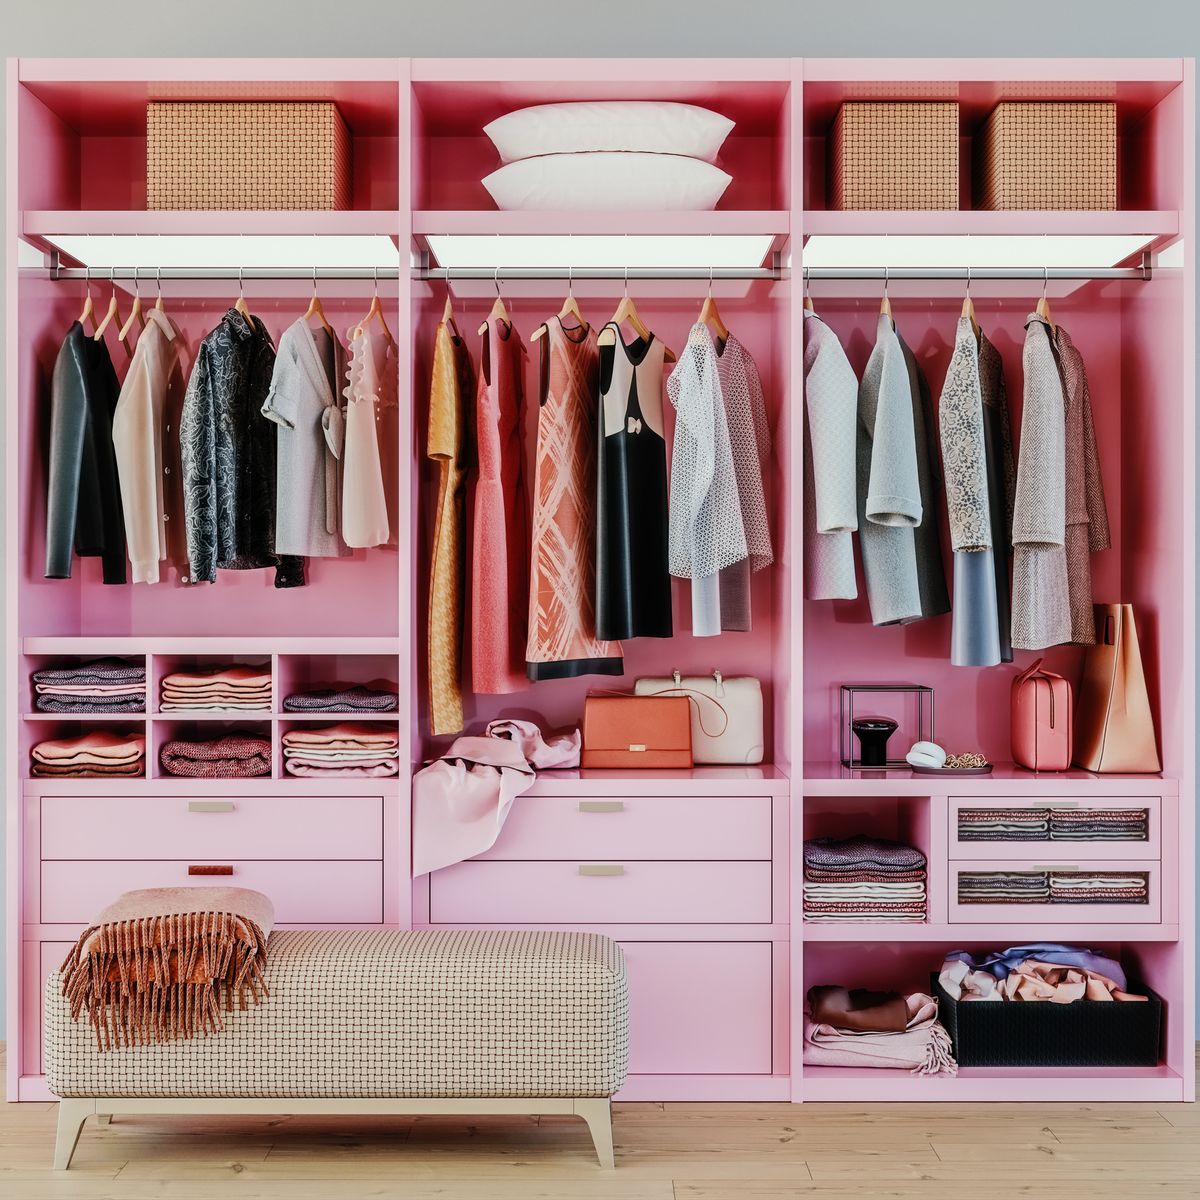 https://hips.hearstapps.com/hmg-prod/images/modern-pink-wardrobe-with-clothes-hanging-on-rail-royalty-free-image-1574877138.jpg?crop=0.90929xw:1xh;center,top&resize=1200:*